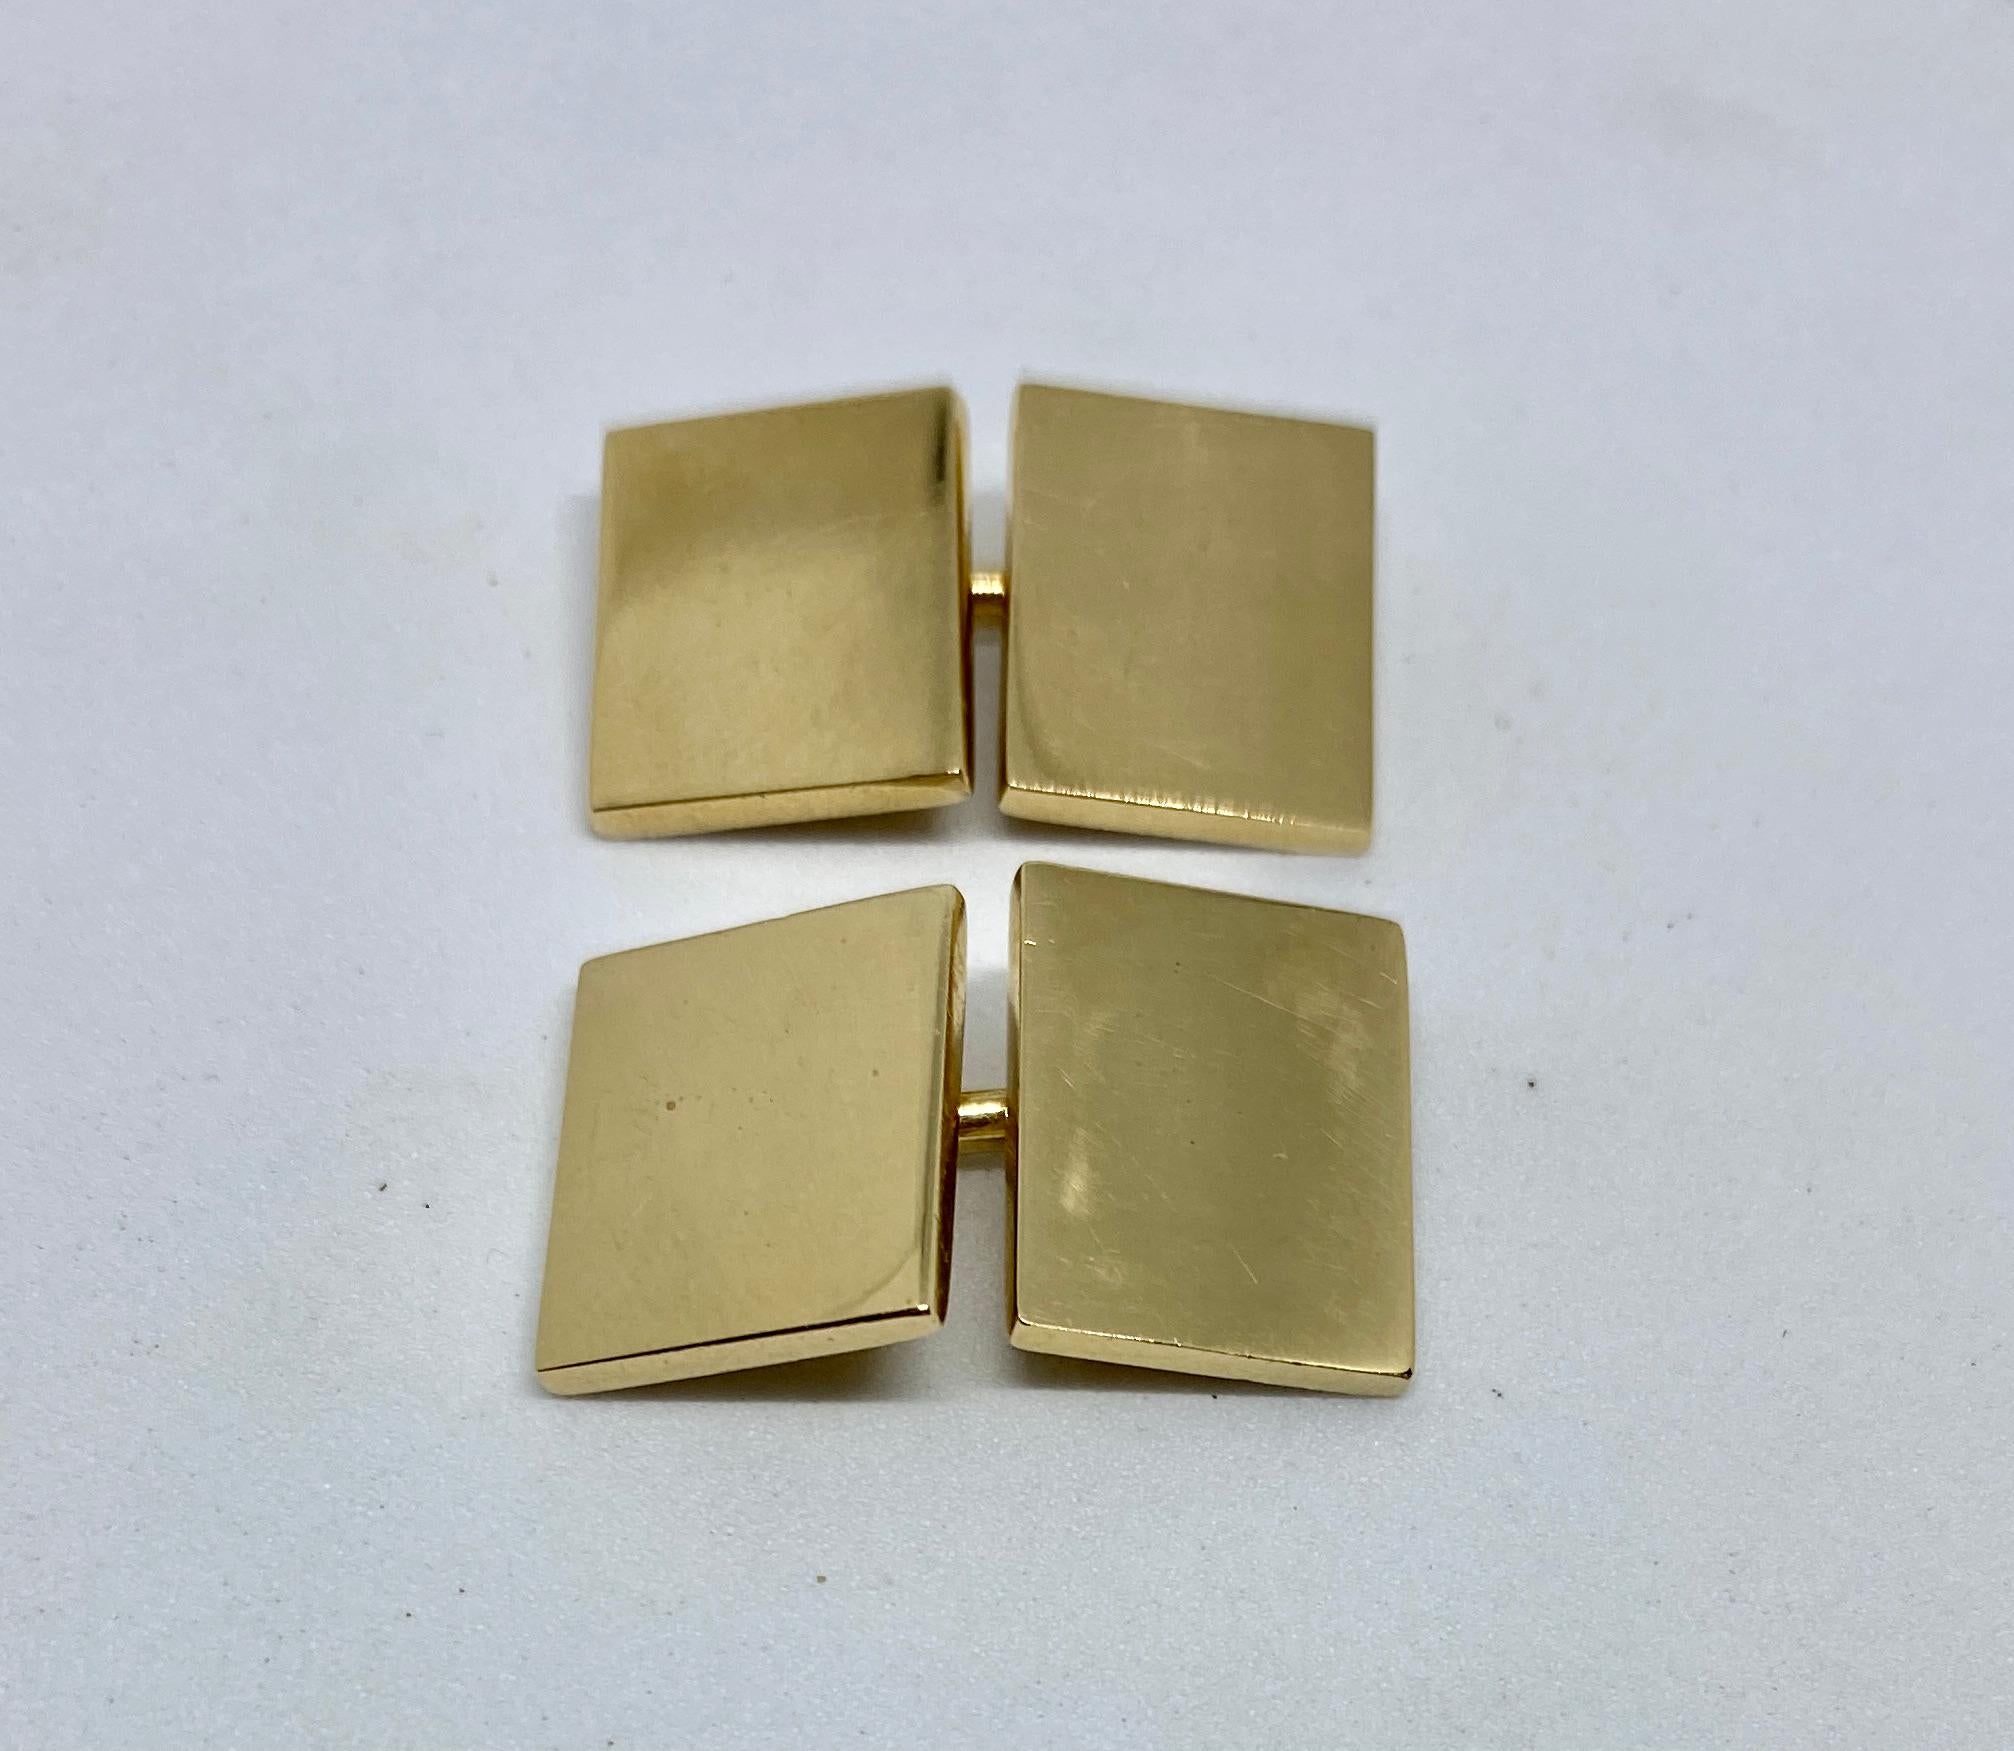 Extremely unusual double-sided rectangular cufflinks in solid yellow gold by Cartier.

As is to be expected, the cufflinks are extremely well made, weighing more than 20 grams. The four cufflinks faces each measure 12.6 by 16mm. The gold is thick